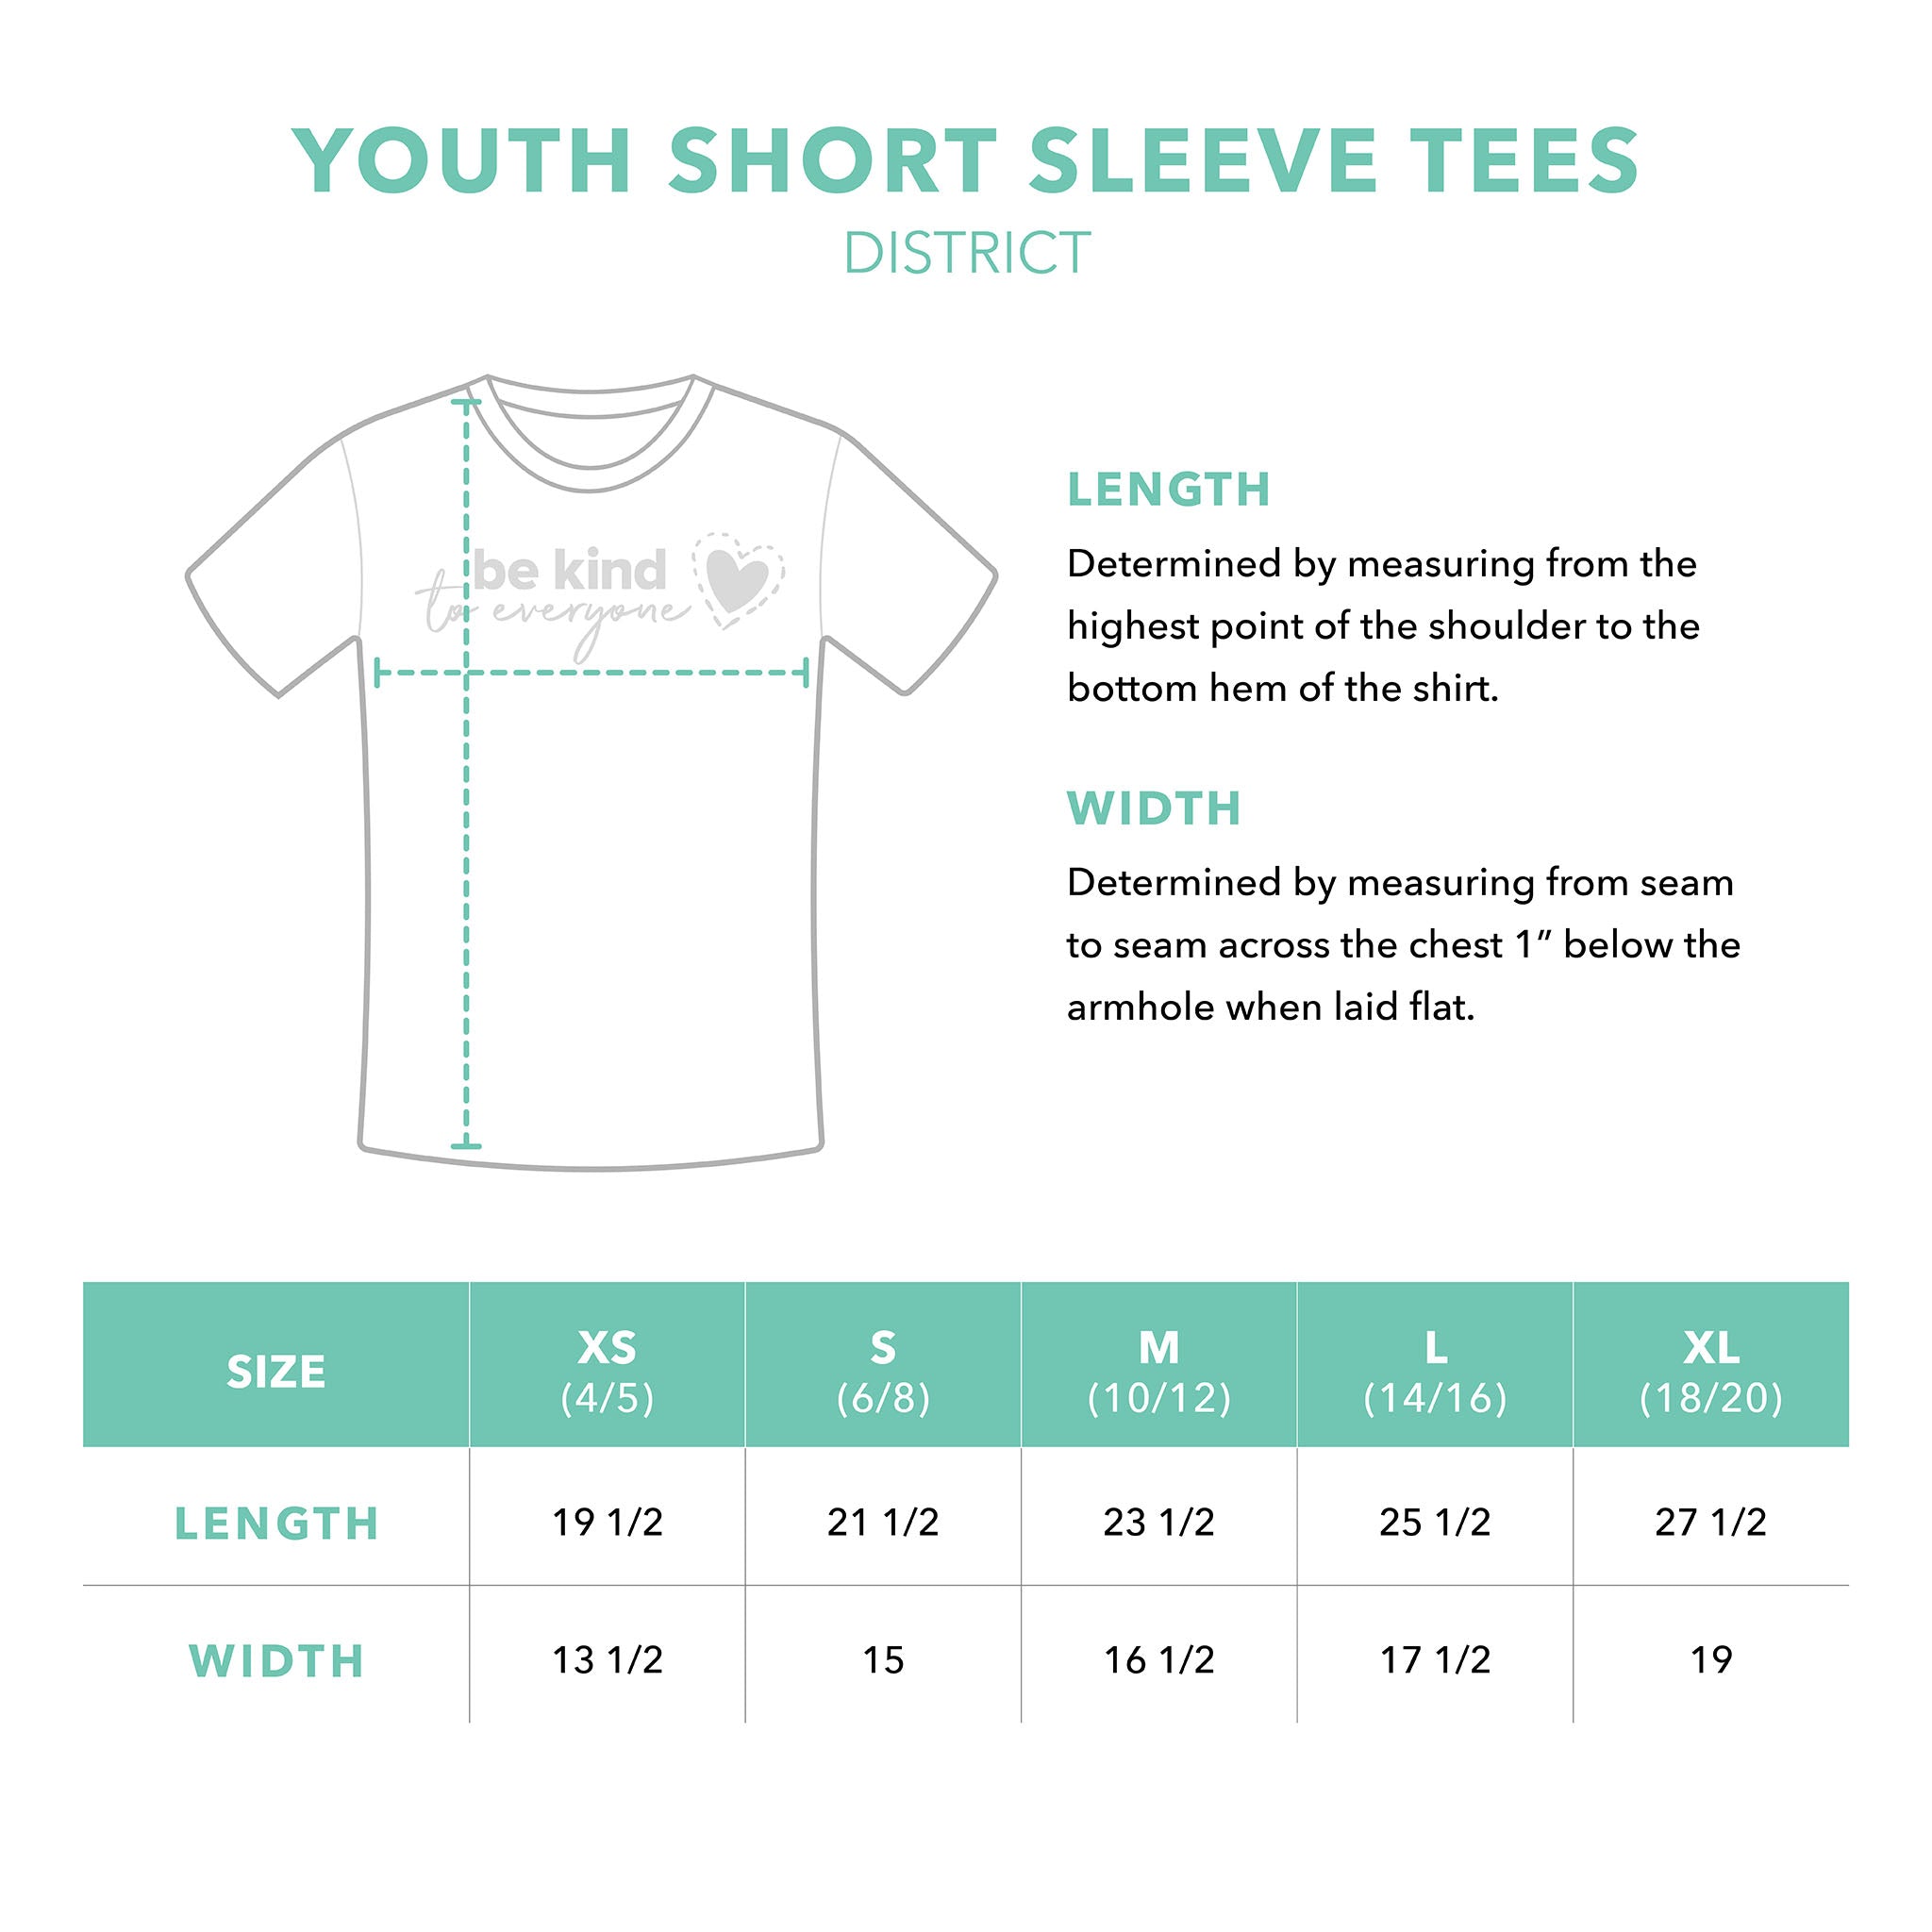 Youth District Short Sleeve Sizing Guide